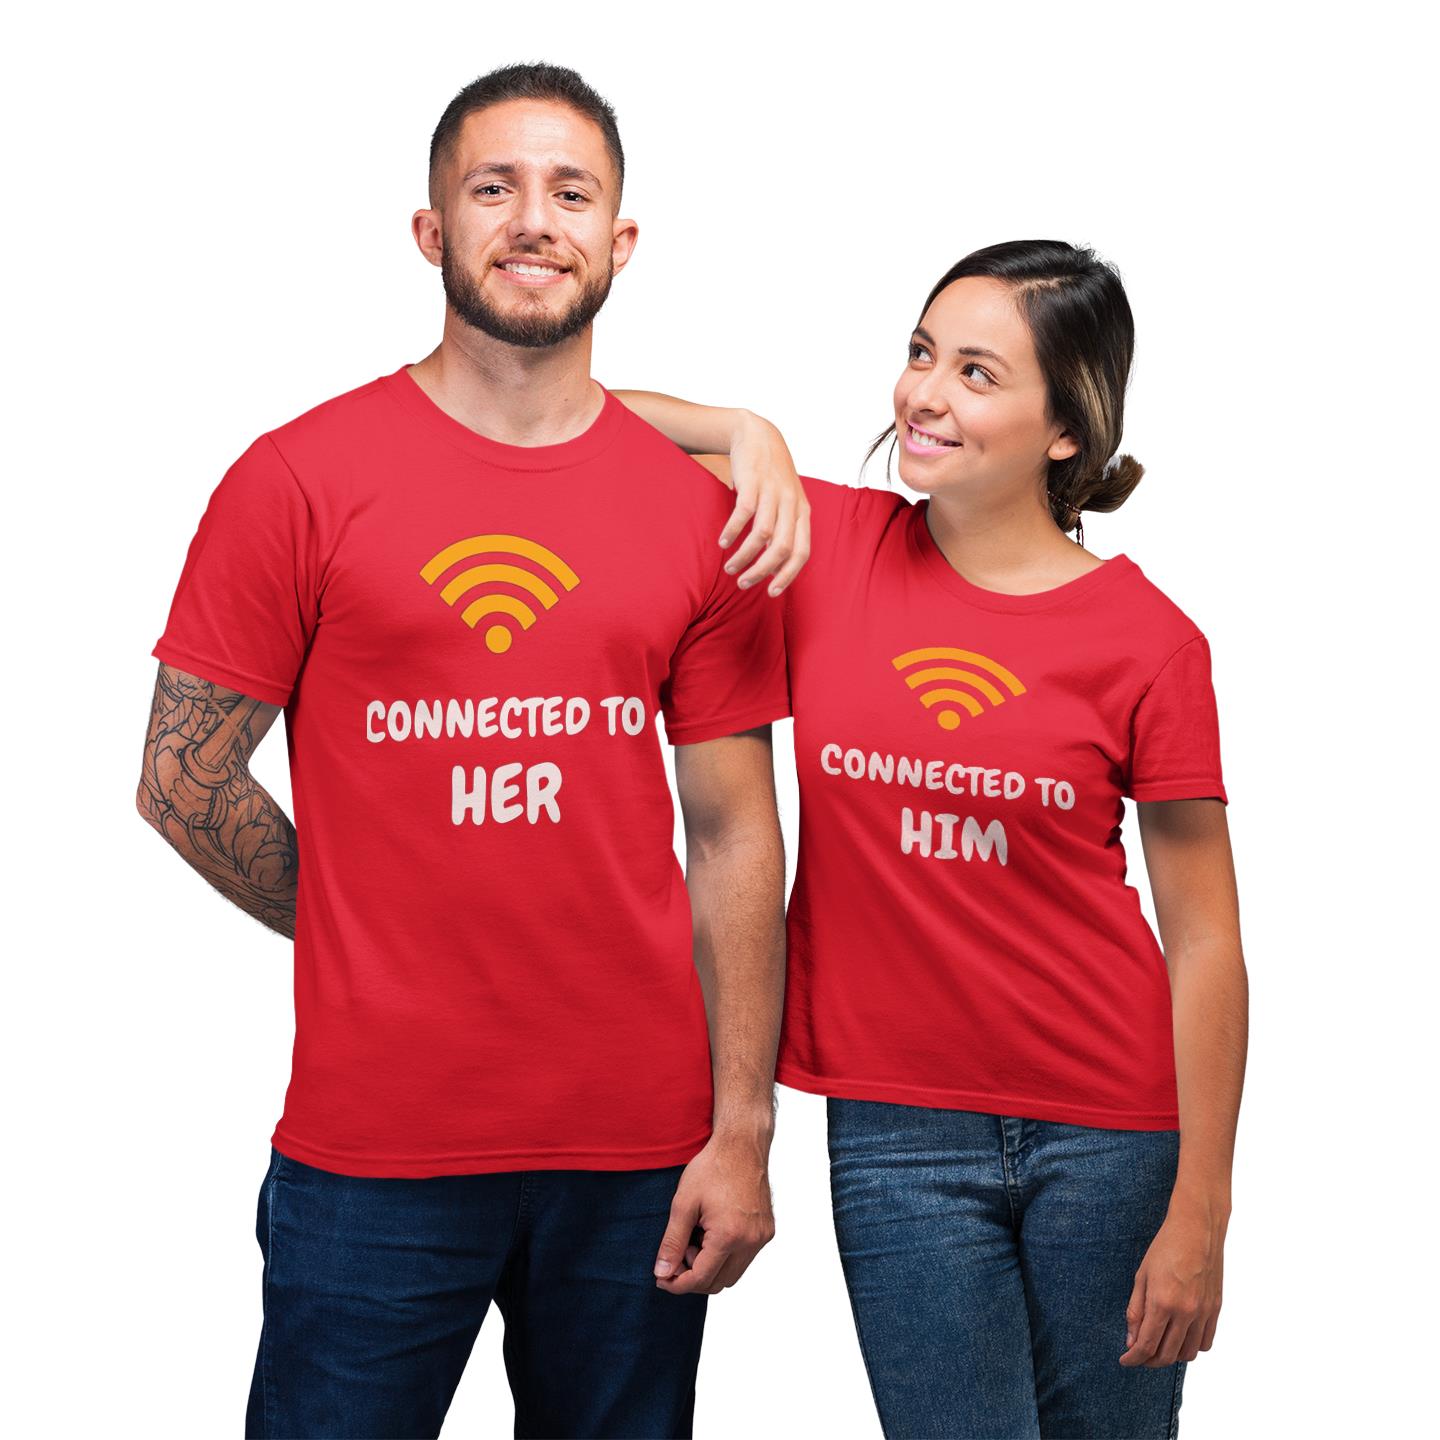 We Are Connected To Him And Her Shirt For Couple T-shirt